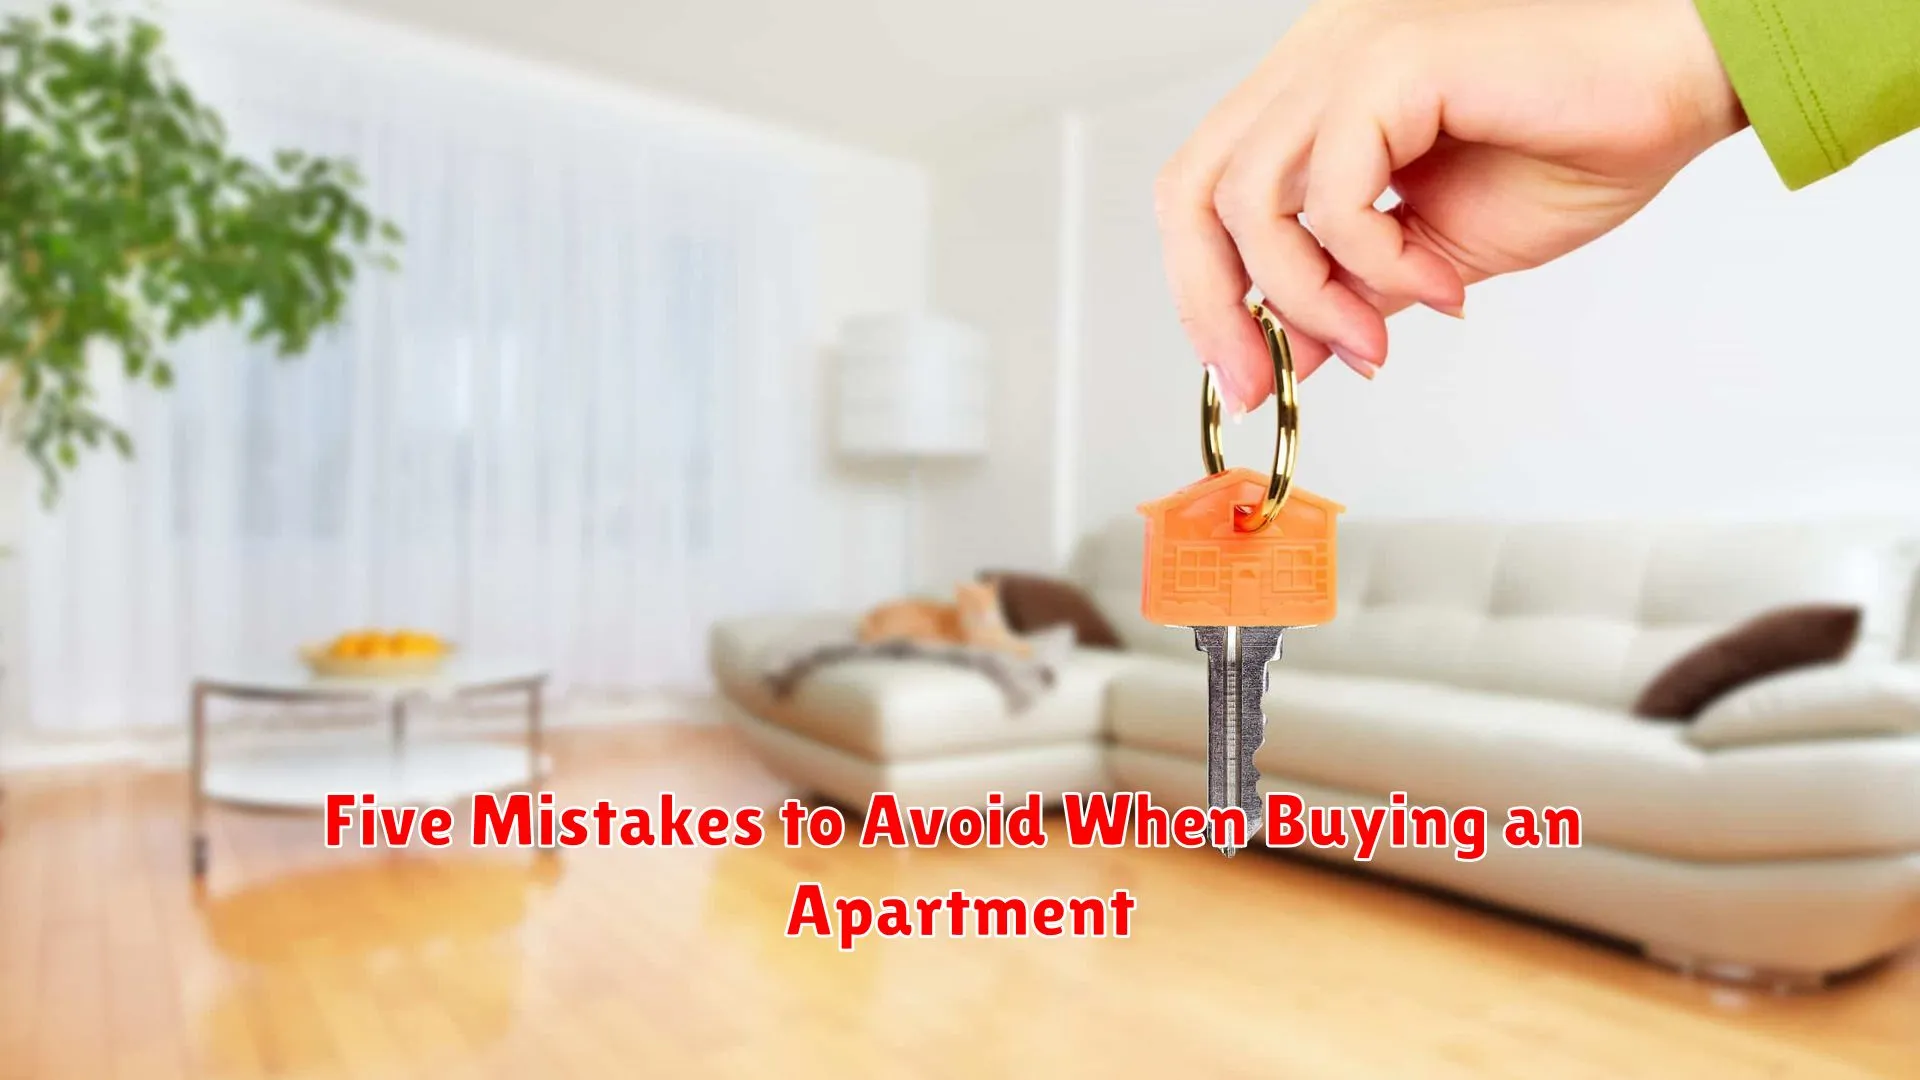 Five Mistakes to Avoid When Buying an Apartment